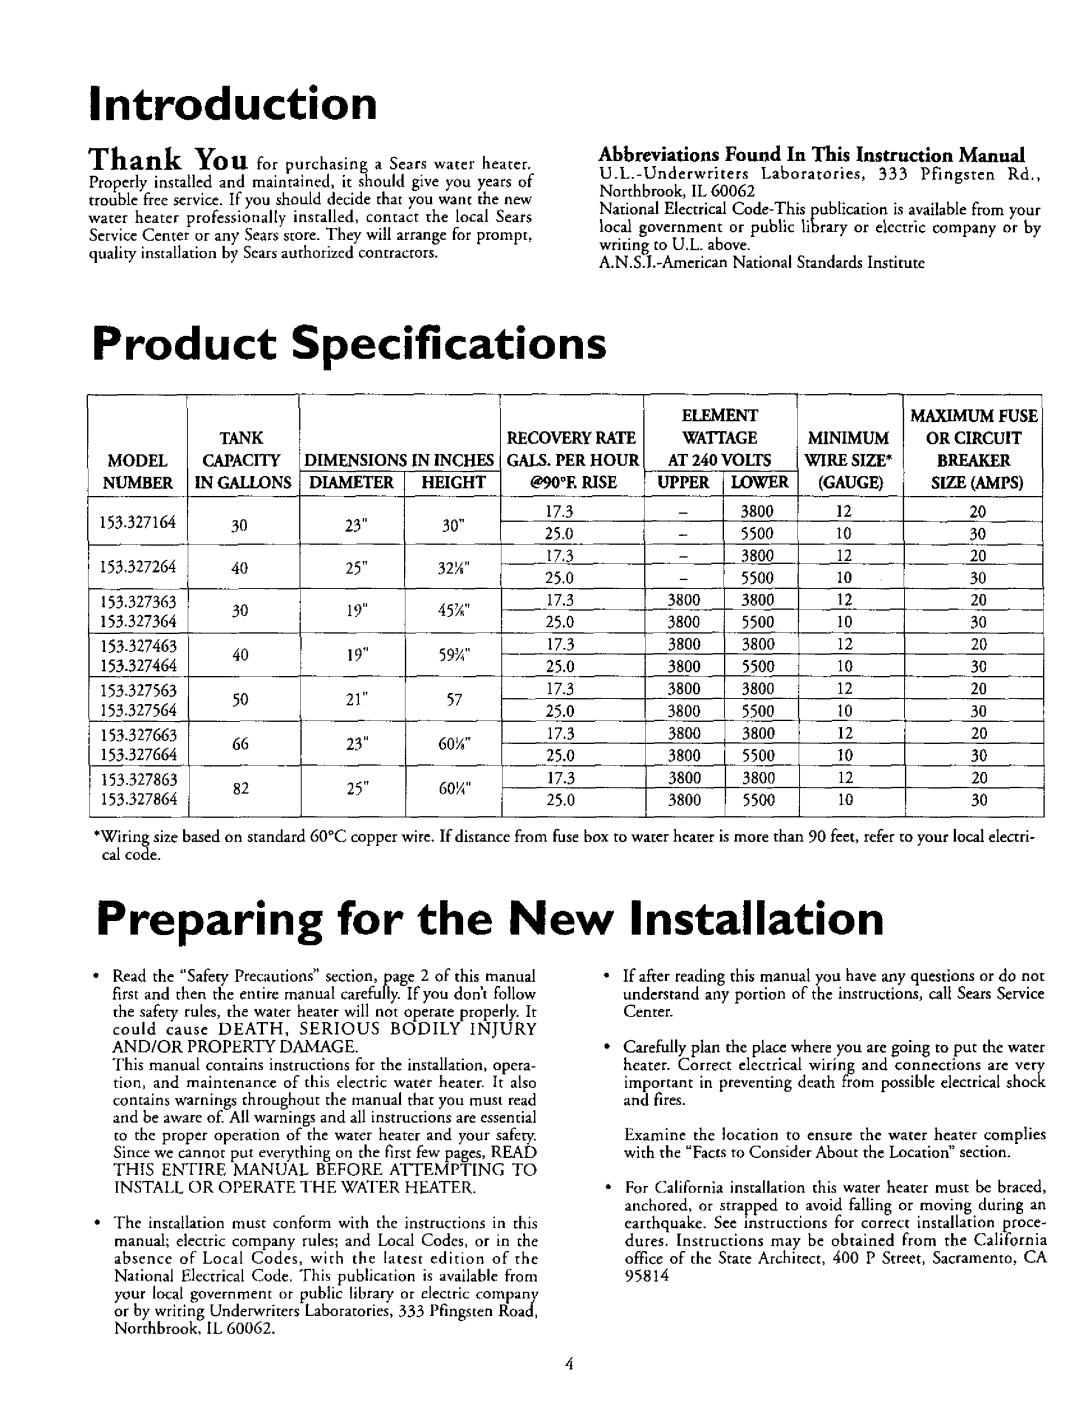 Kenmore 153.327464, 153.327864, 153.327664 Preparing for the New Installation, Introduction, Product, Specifications 